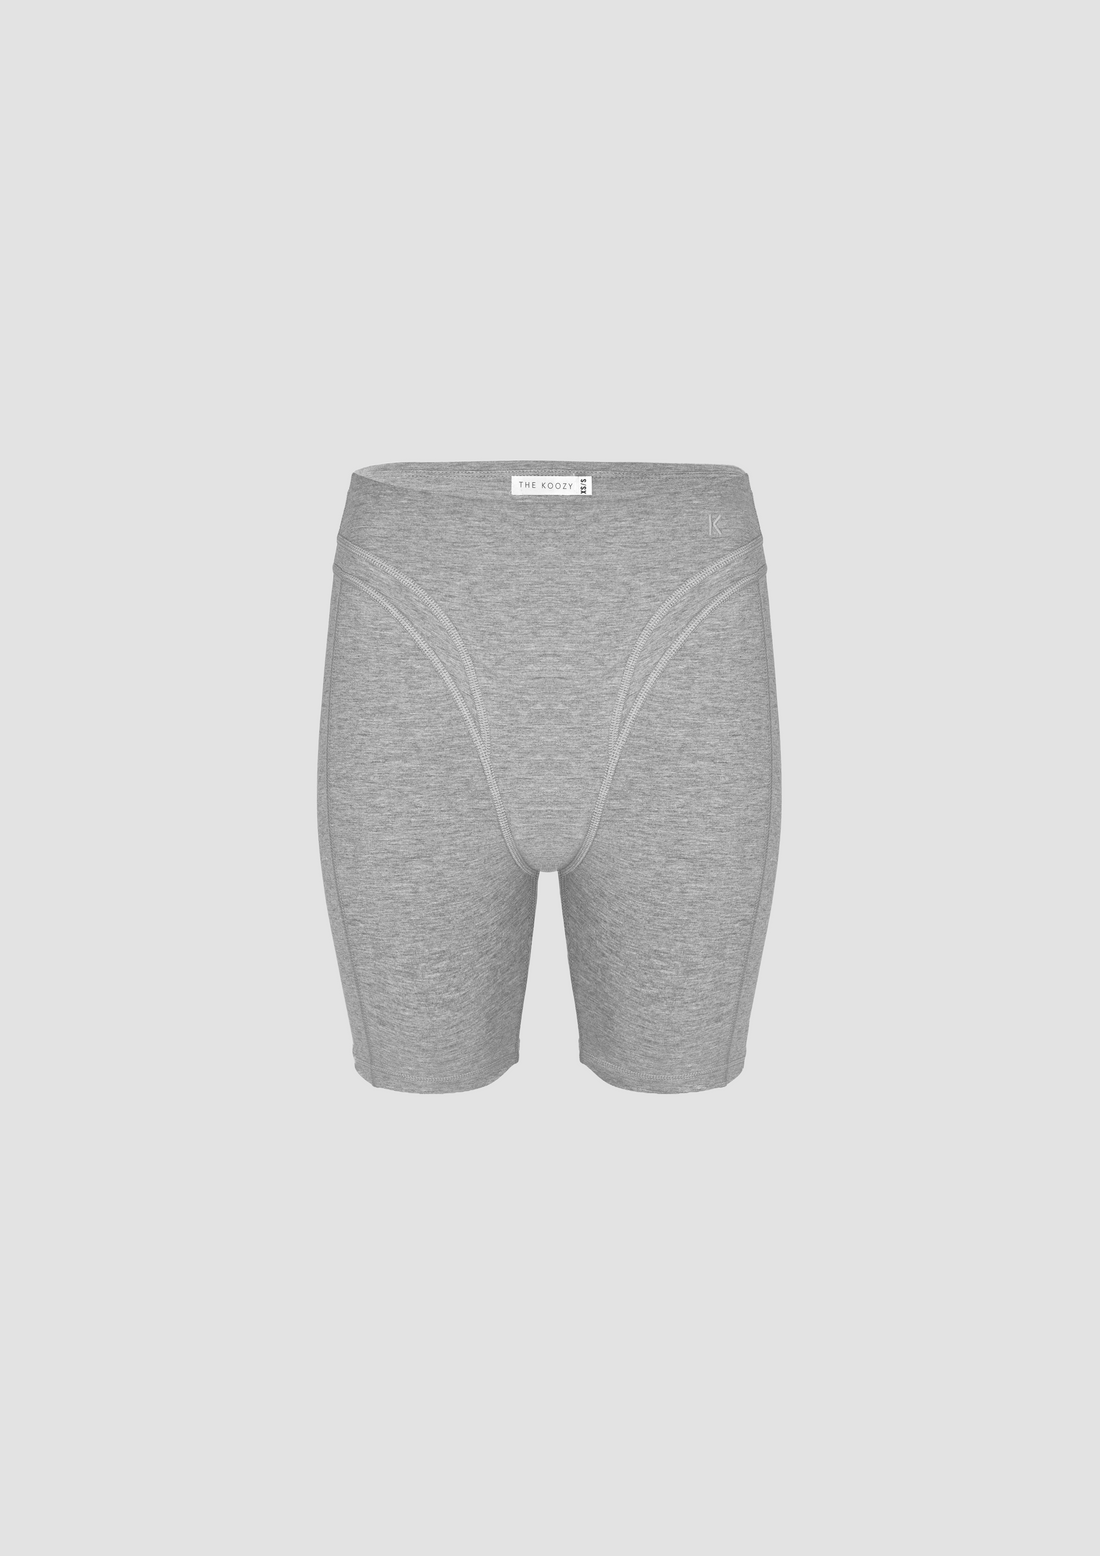 Monroe Stretch Shorts in TENCEL™ Lyocell and Organic Cotton in Melange